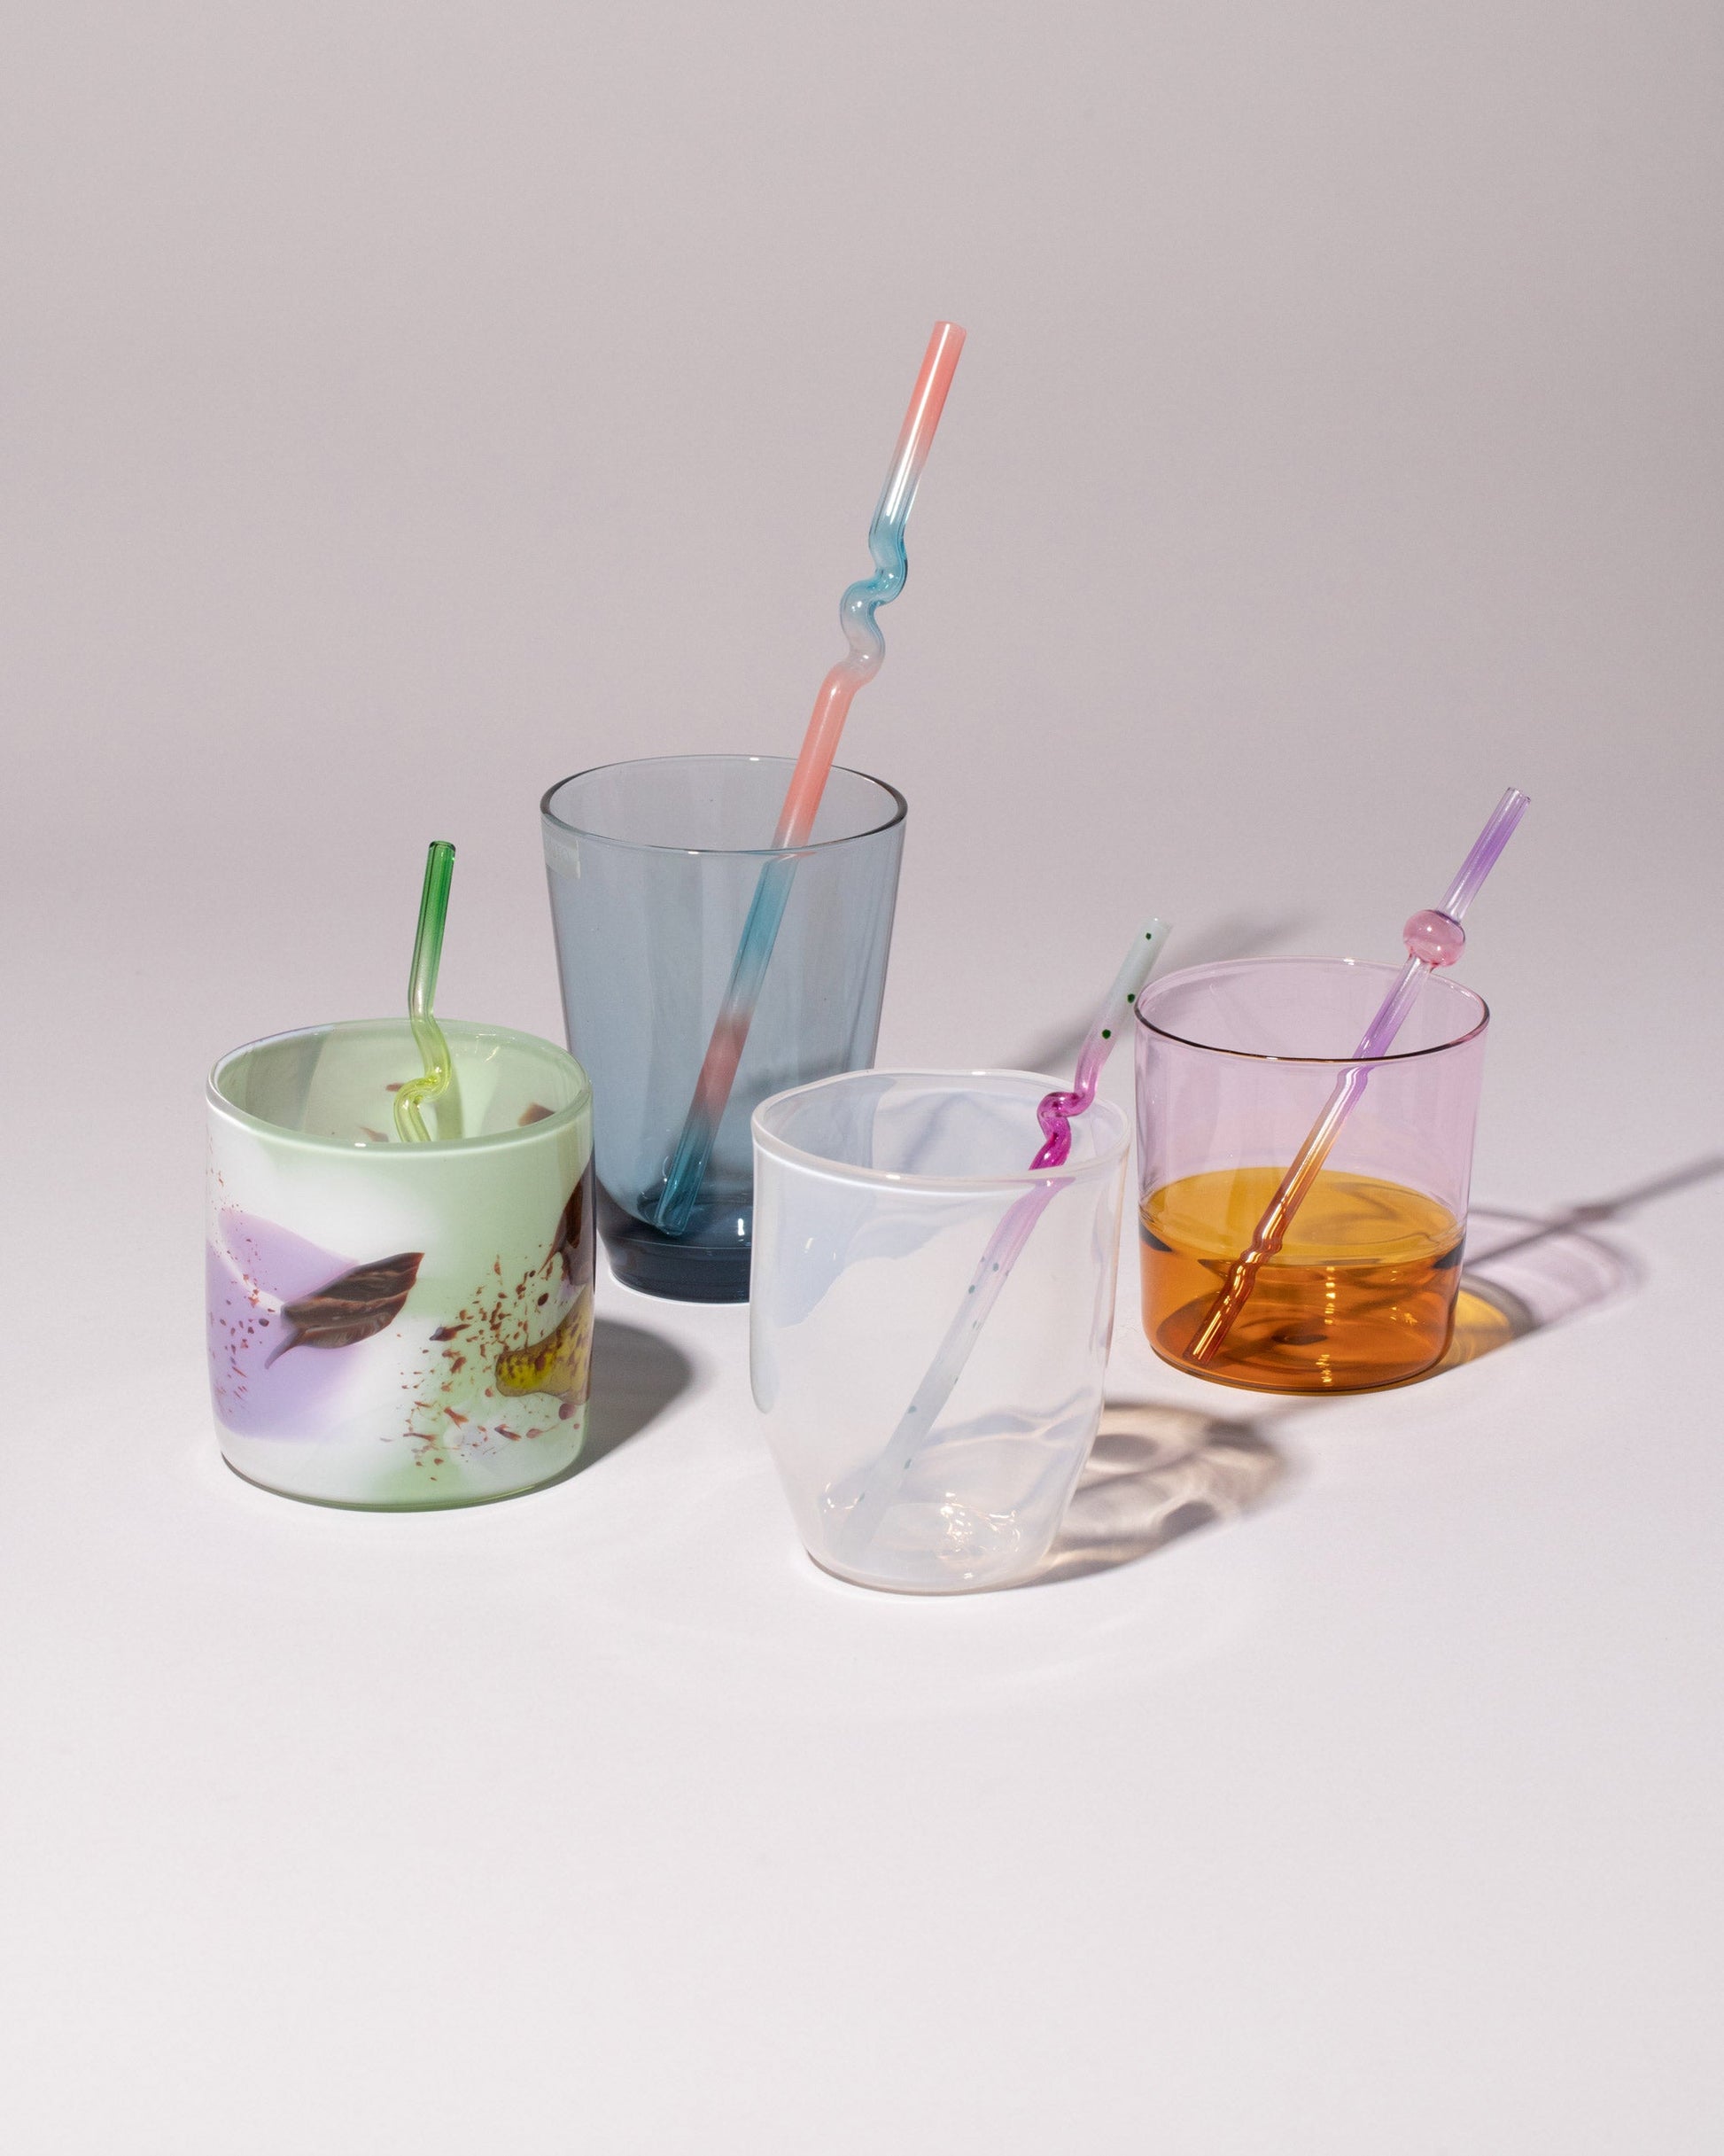 Styled image featuring Misha Kahn Suck It Up Glass Cocktail Straws, Misha Kahn Suck It Up Glass Straws, Balefire Mint Epiphany Cup, Balefire Alabaster Gossamer Cup, Ichendorf Milano Amber/Pink Light Colore Water Glass, and Kinto Hibi Blue Glass on a light colored background.